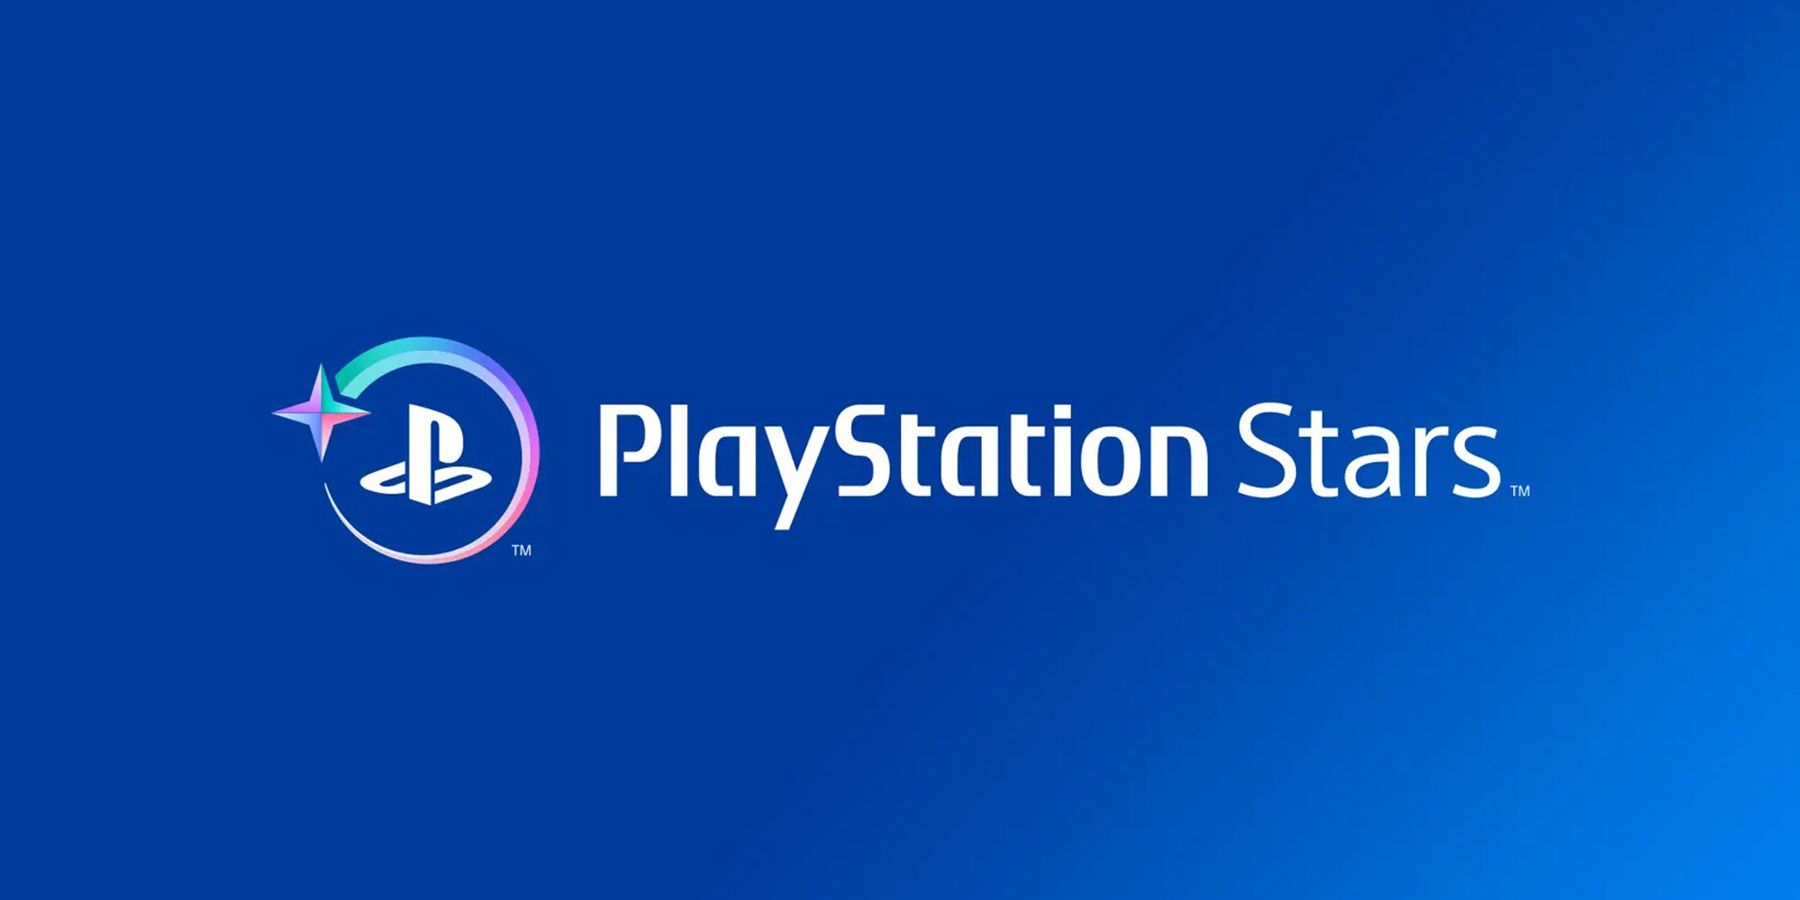 playstation stars hit play 1994 storage space